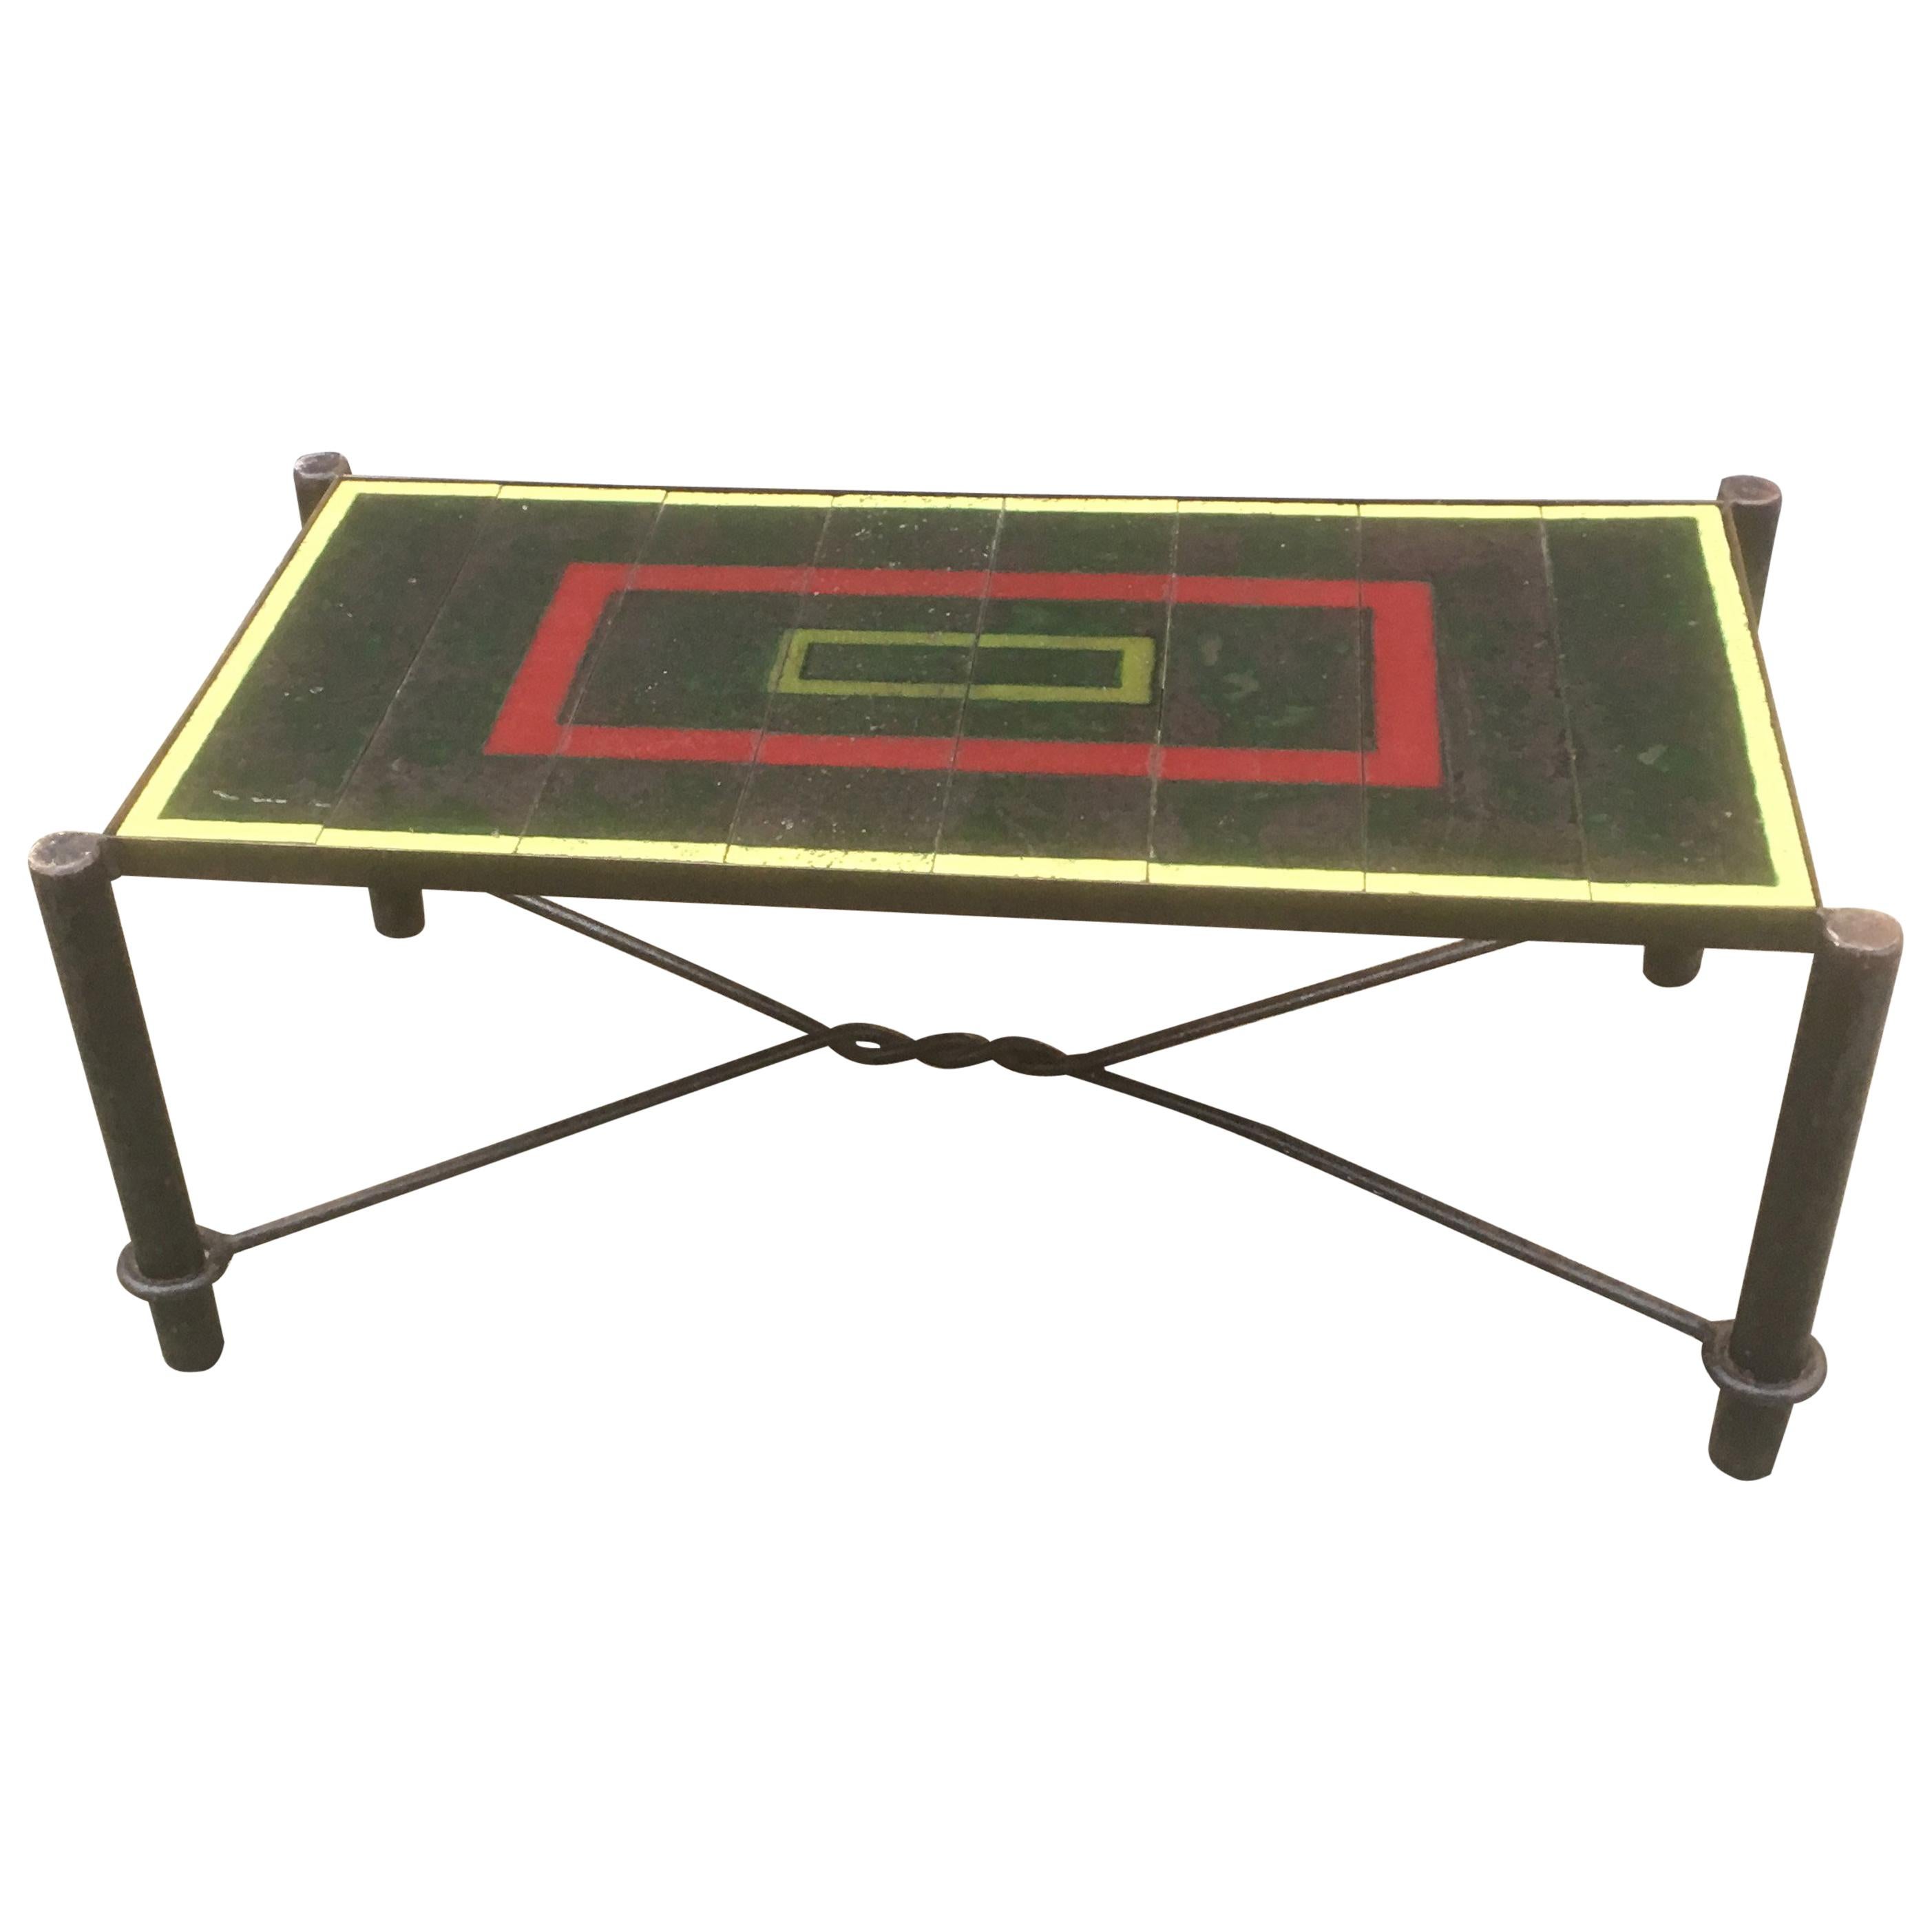 Jacques Adnet, Art Deco Coffee Table in Lacquered Metal, Tray Composed of Tiles